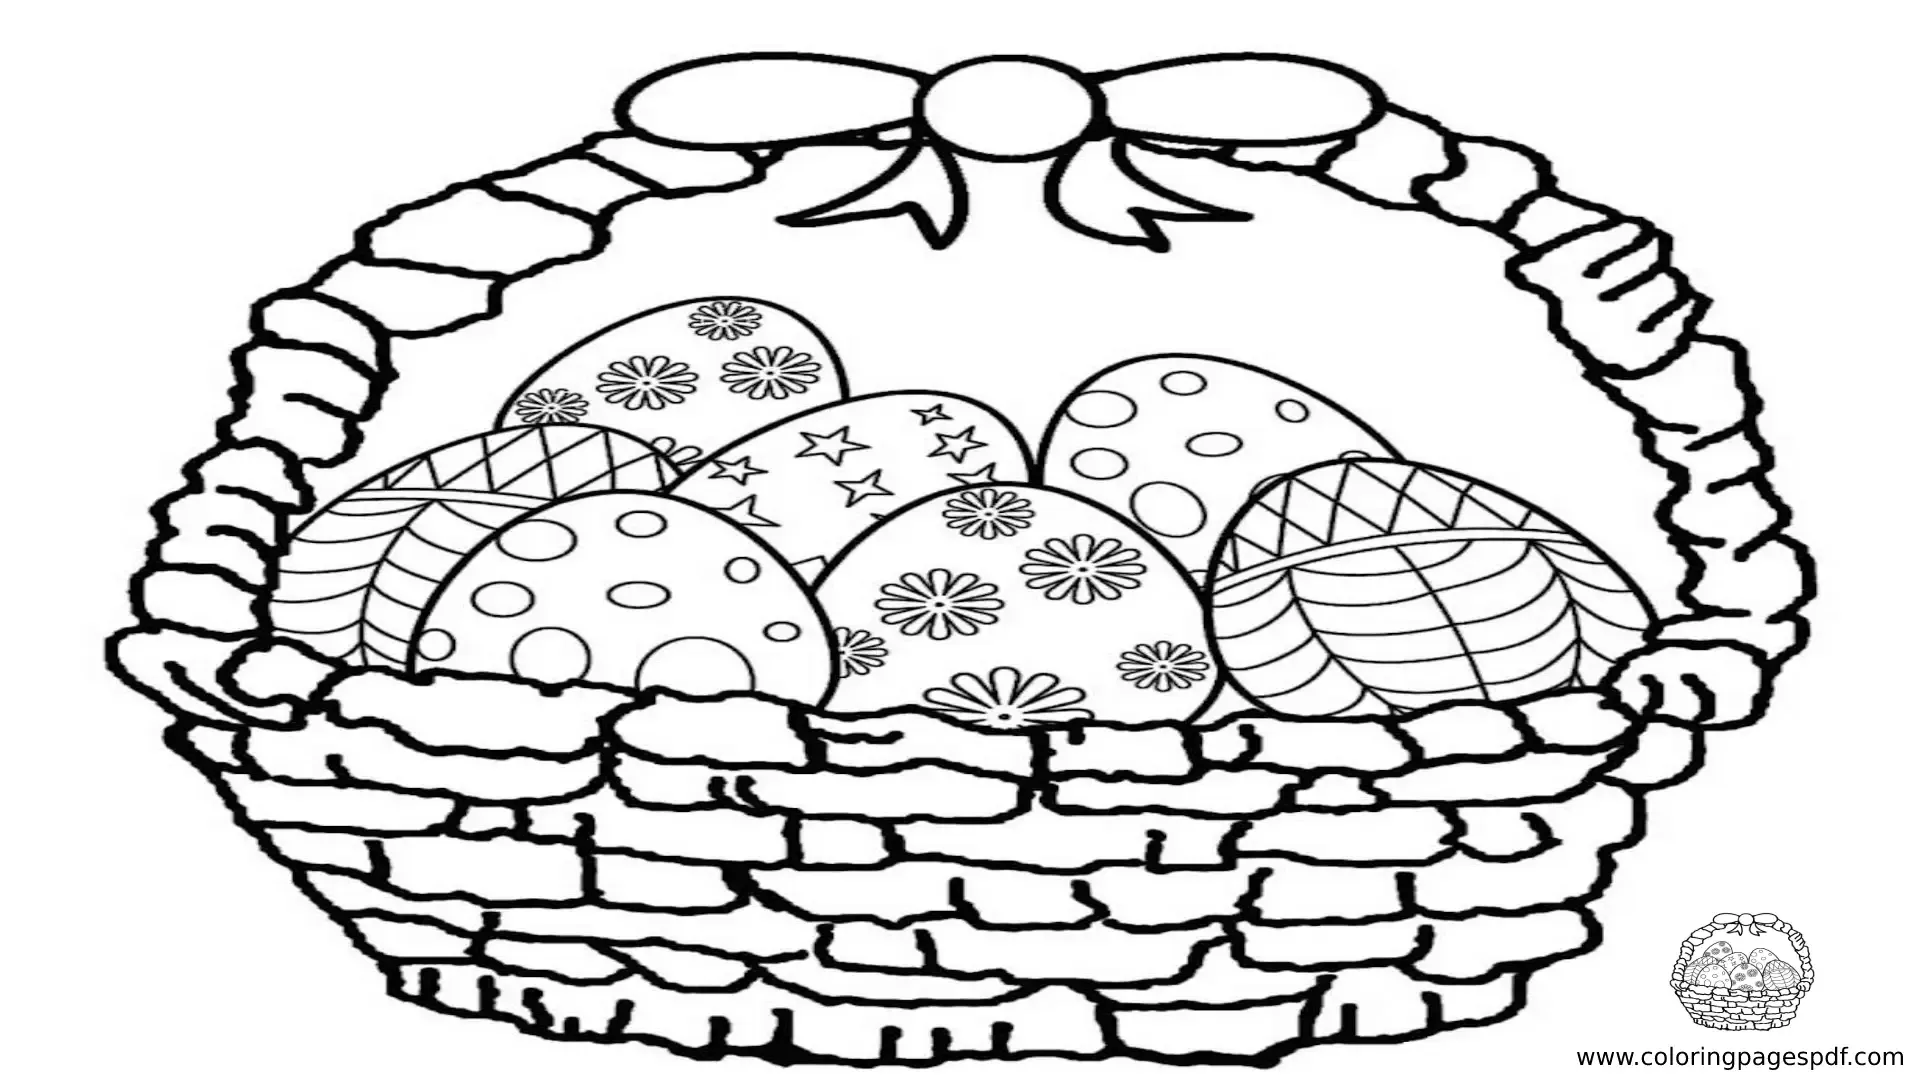 Coloring Pages Of Basket Full Of Decorated Easter Eggs